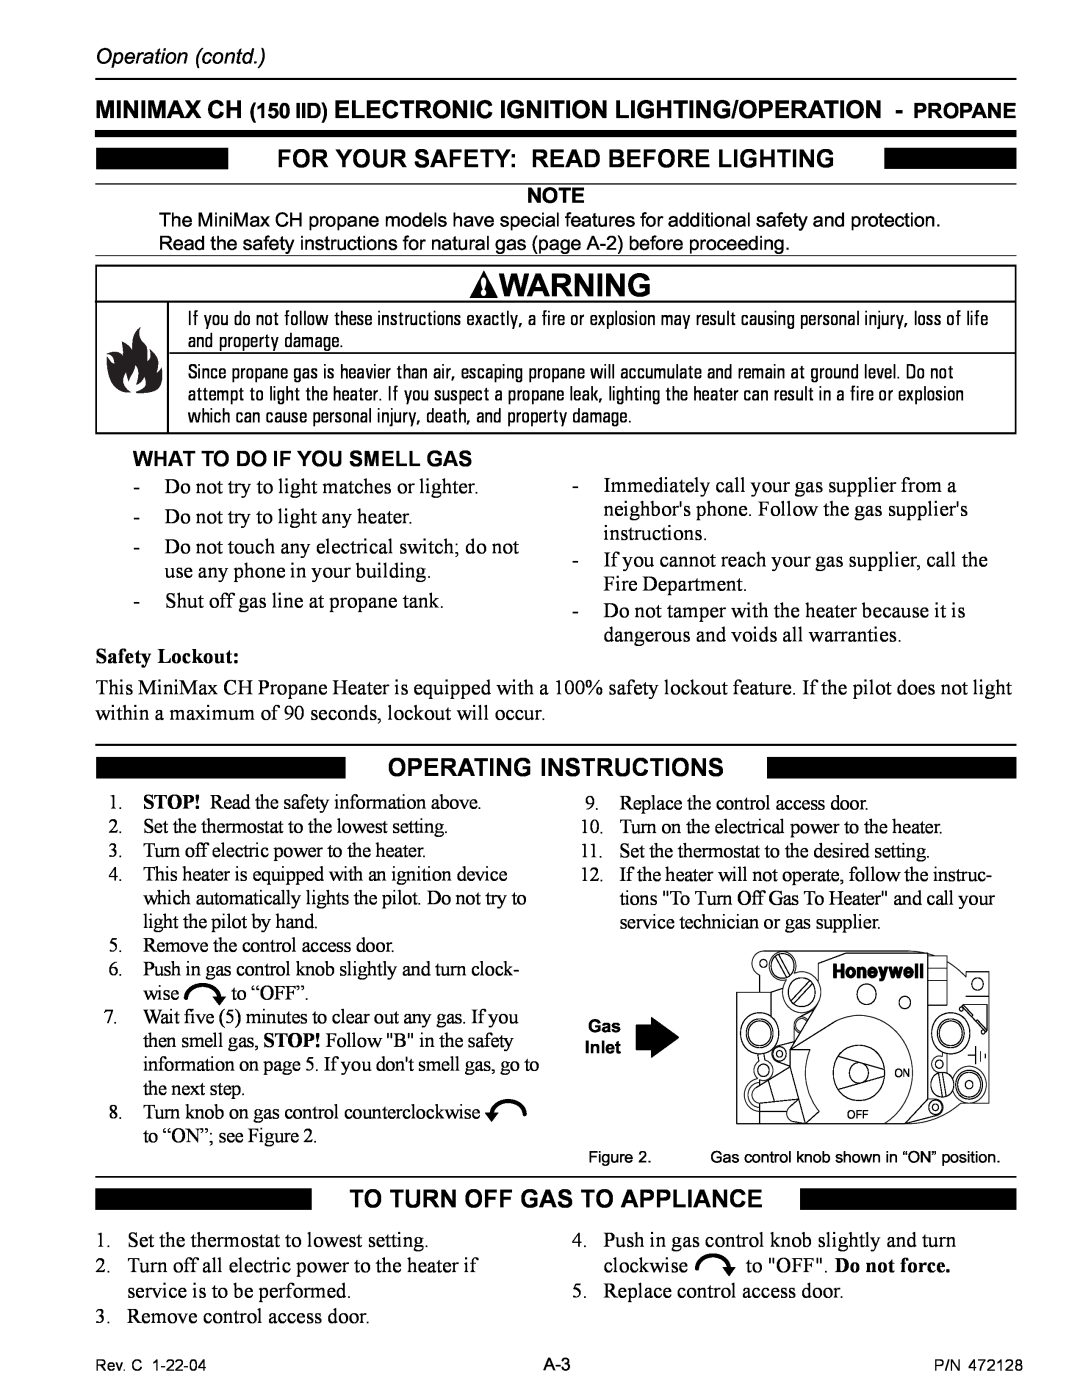 Pentair CH For Your Safety Read Before Lighting, Operating Instructions, To Turn Off Gas To Appliance, Safety Lockout 